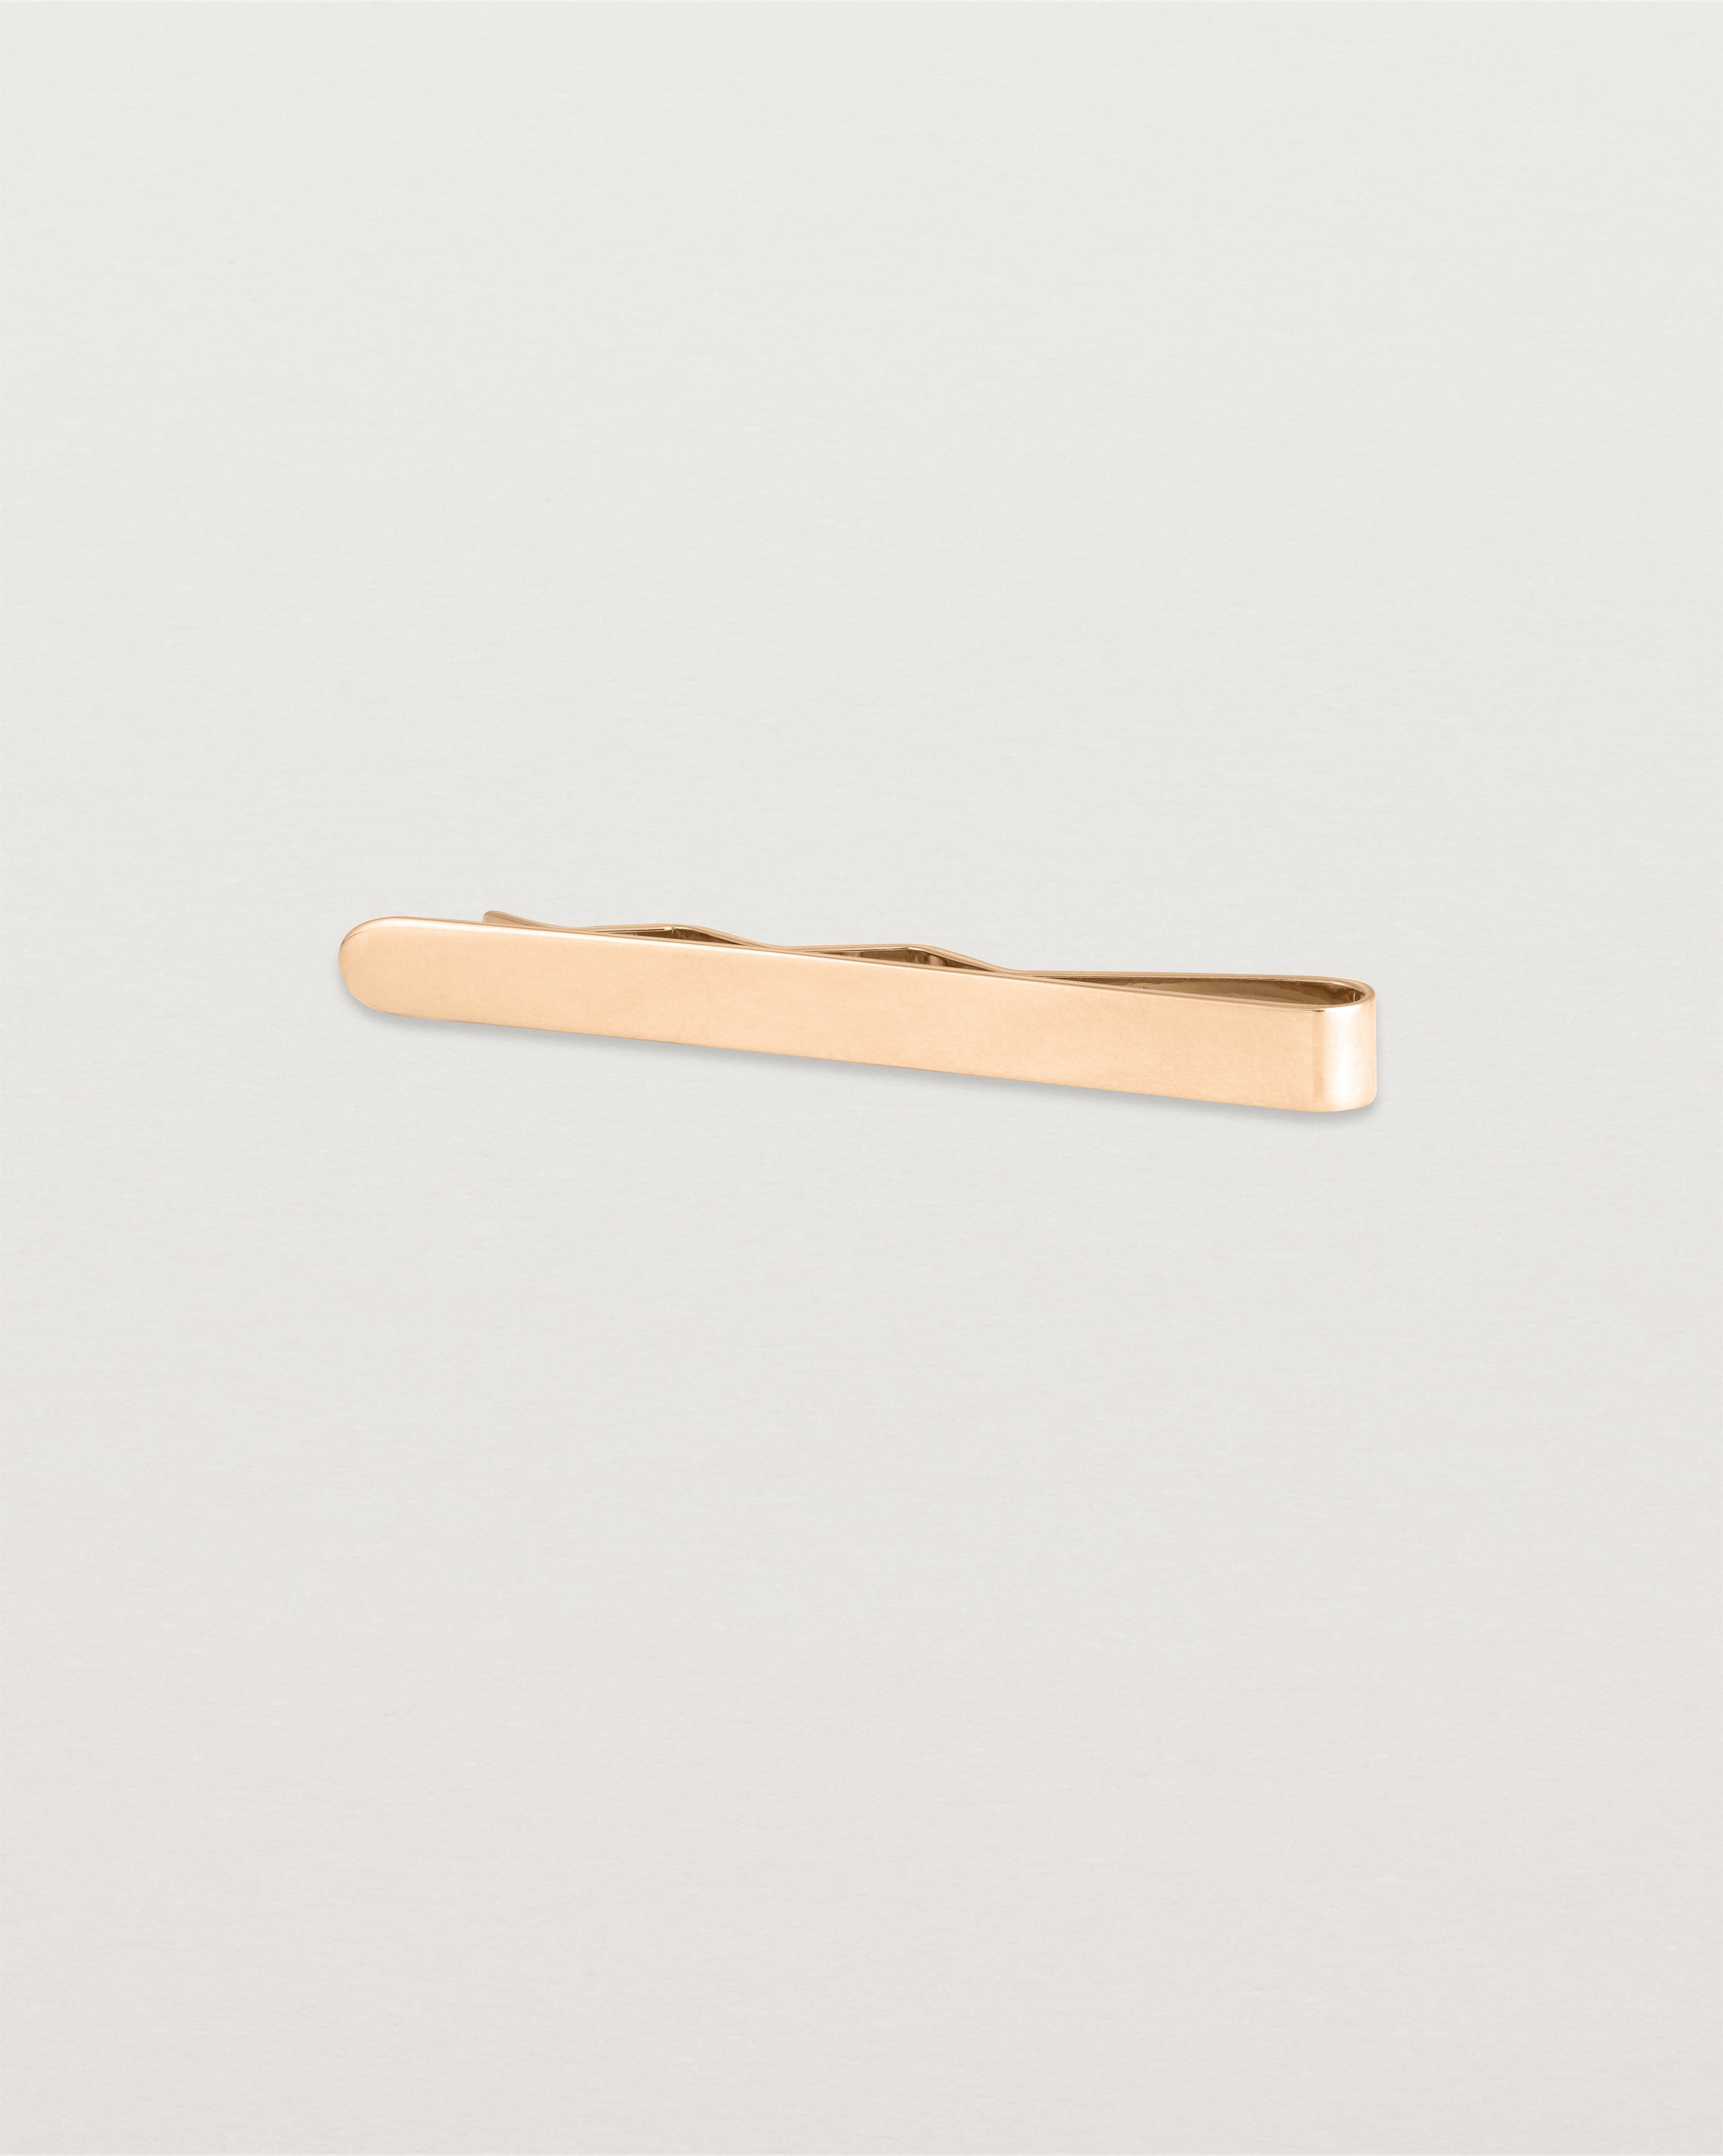 The Turas Tie Bar in Rose Gold.